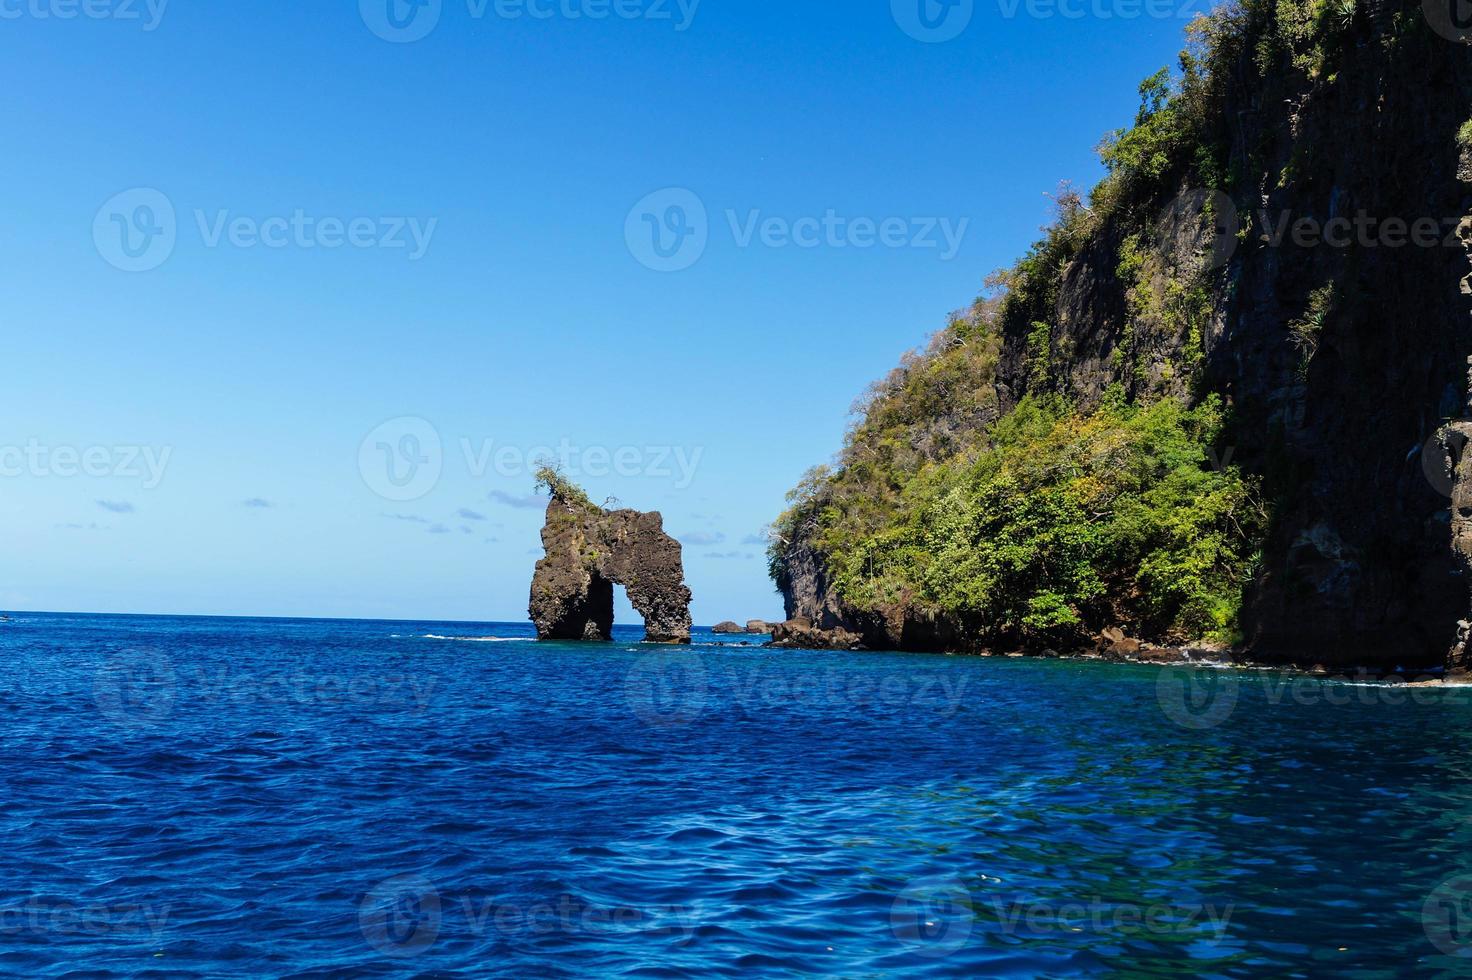 Wallilabou Bay Saint Vincent and the Grenadines in the caribbean sea photo